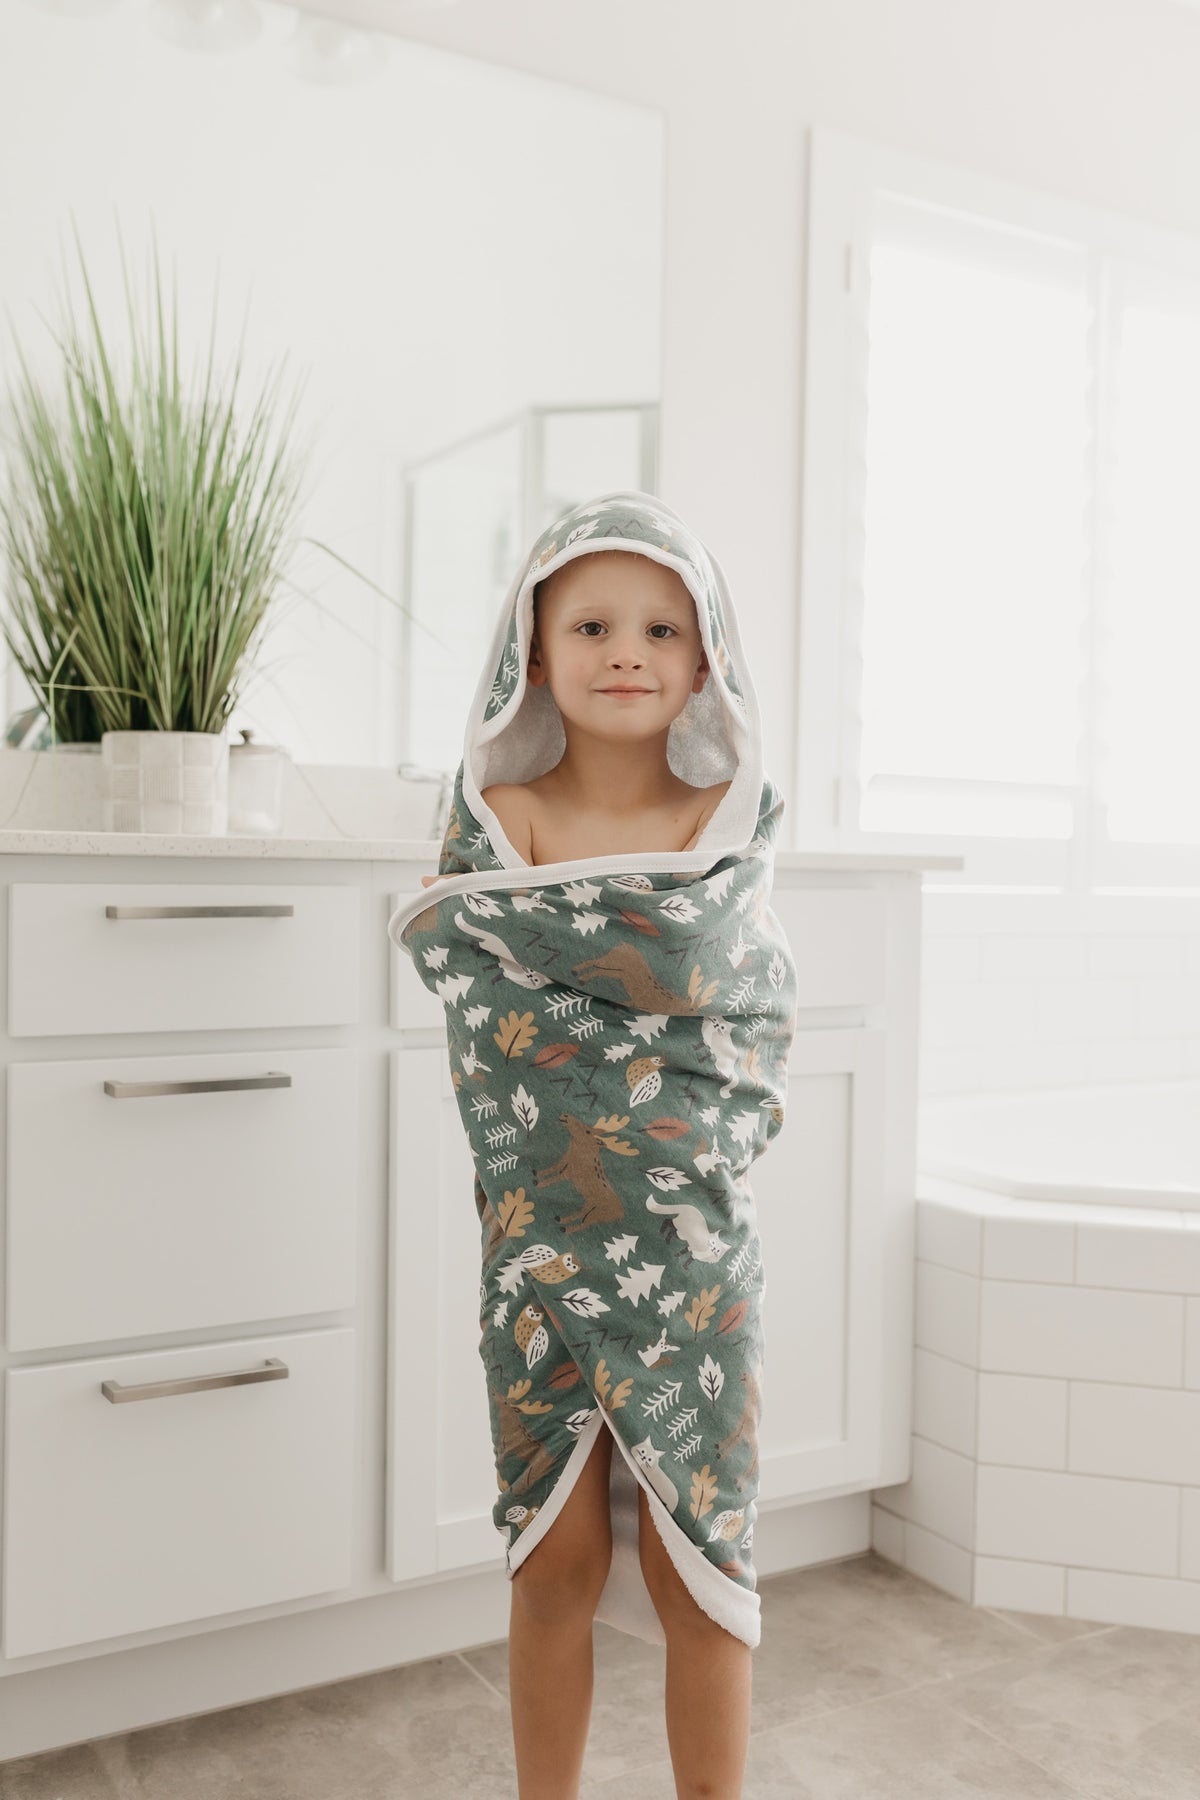 Premium Baby Knit Hooded Towel - Atwood